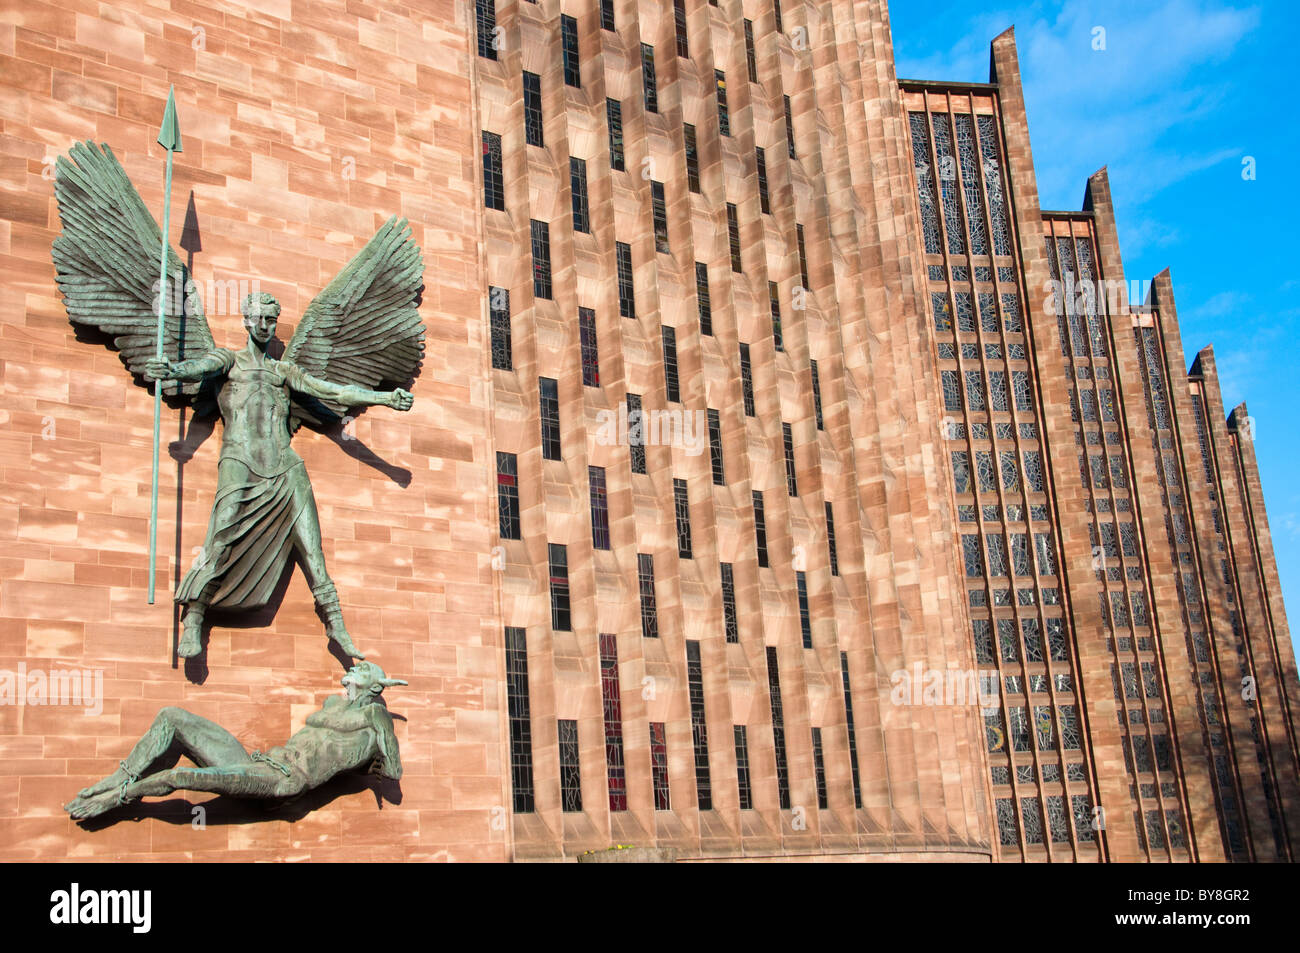 St Michael's Victory over the Devil, sculpture by Sir Jacob Epstein at St Michael's or Coventry Cathedral, England. Stock Photo